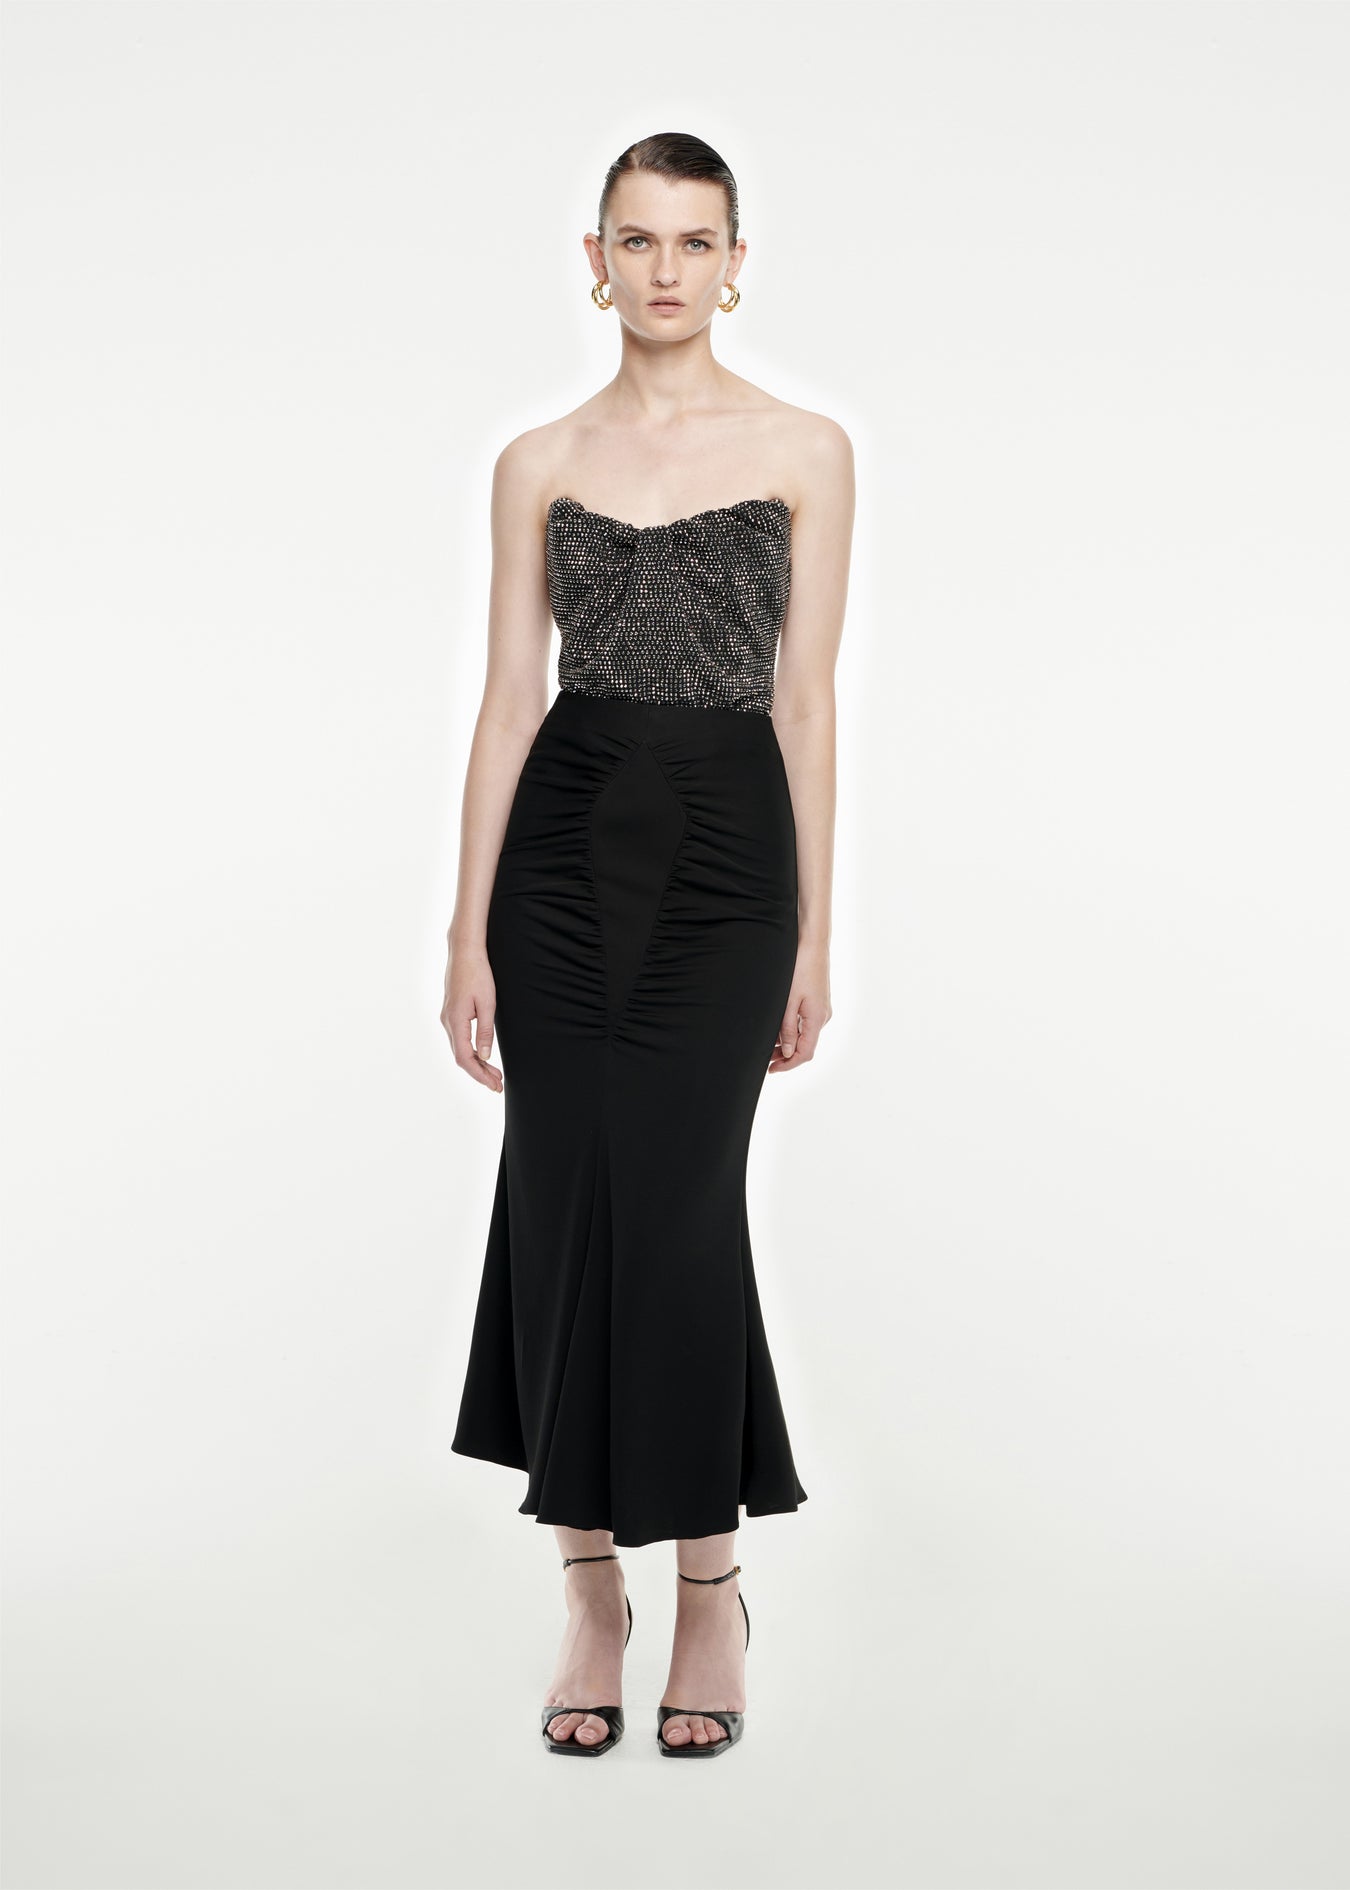 Woman wearing the Strapless Diamante Top in Black